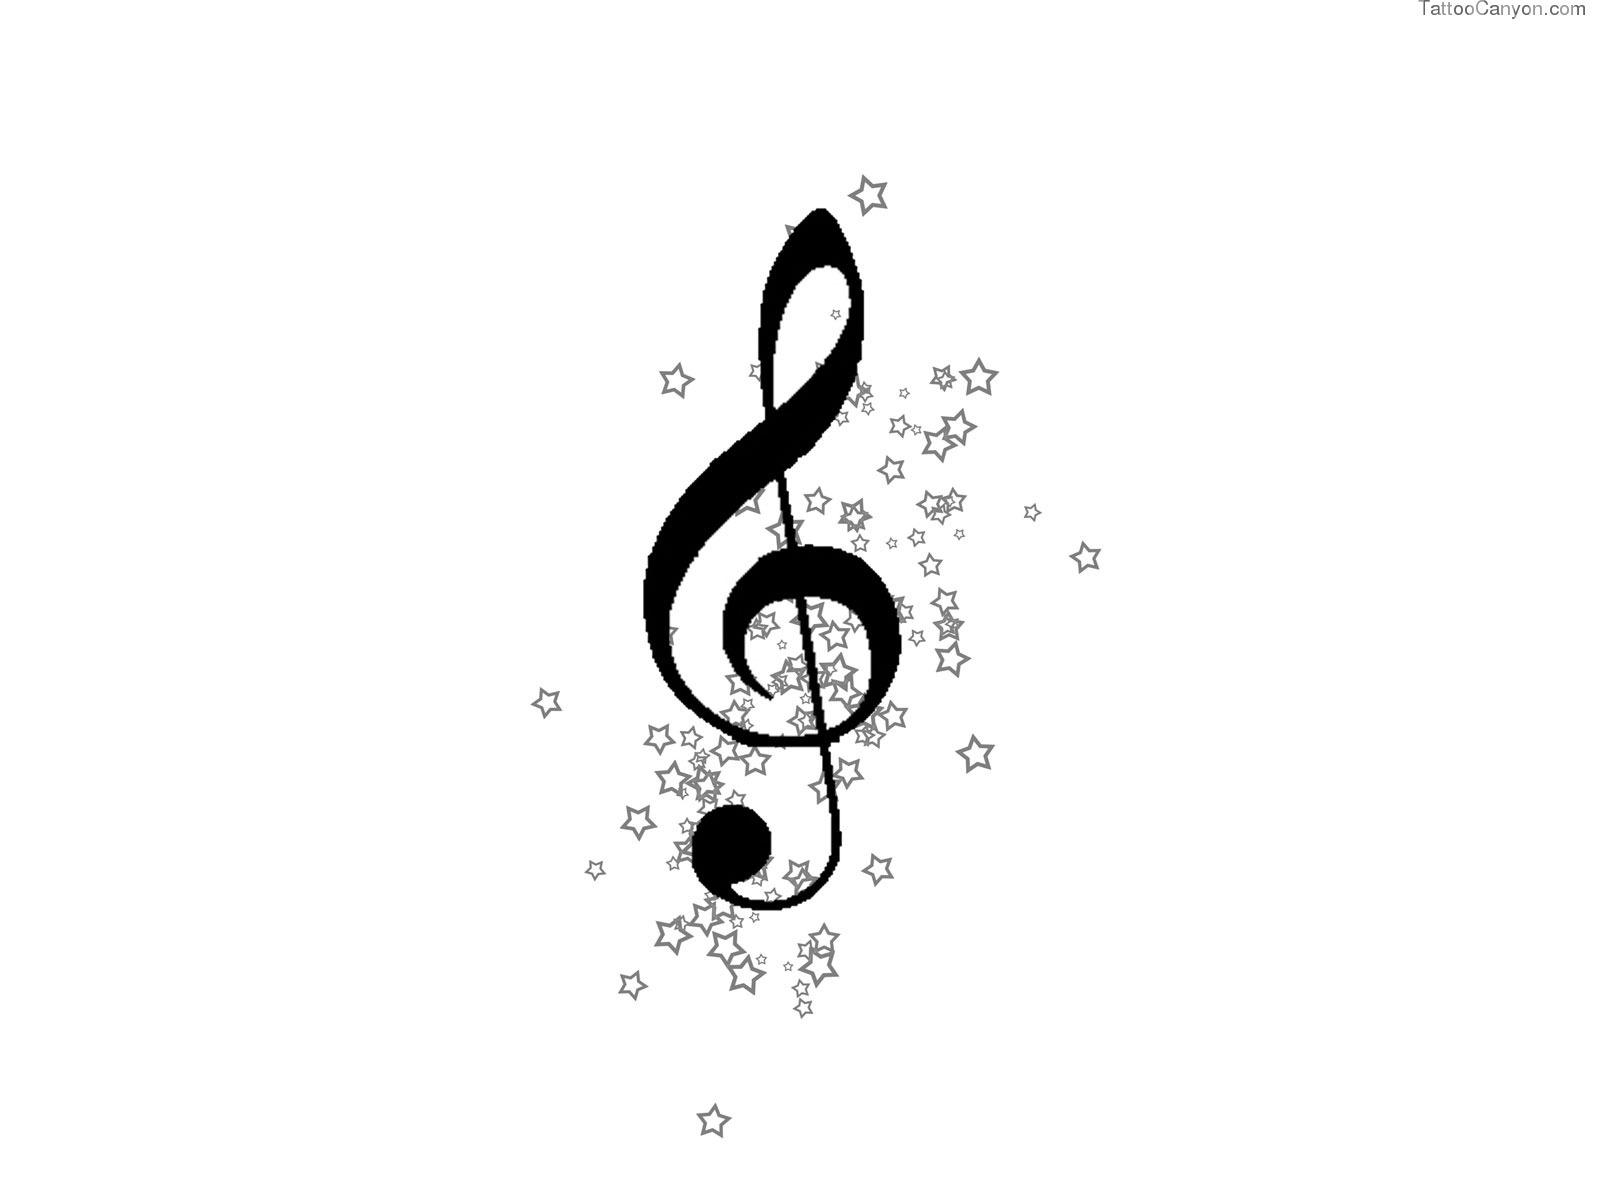 Free Designs Music Clef And Stars Tattoo Wallpaper Picture ... - ClipArt  Best - ClipArt Best